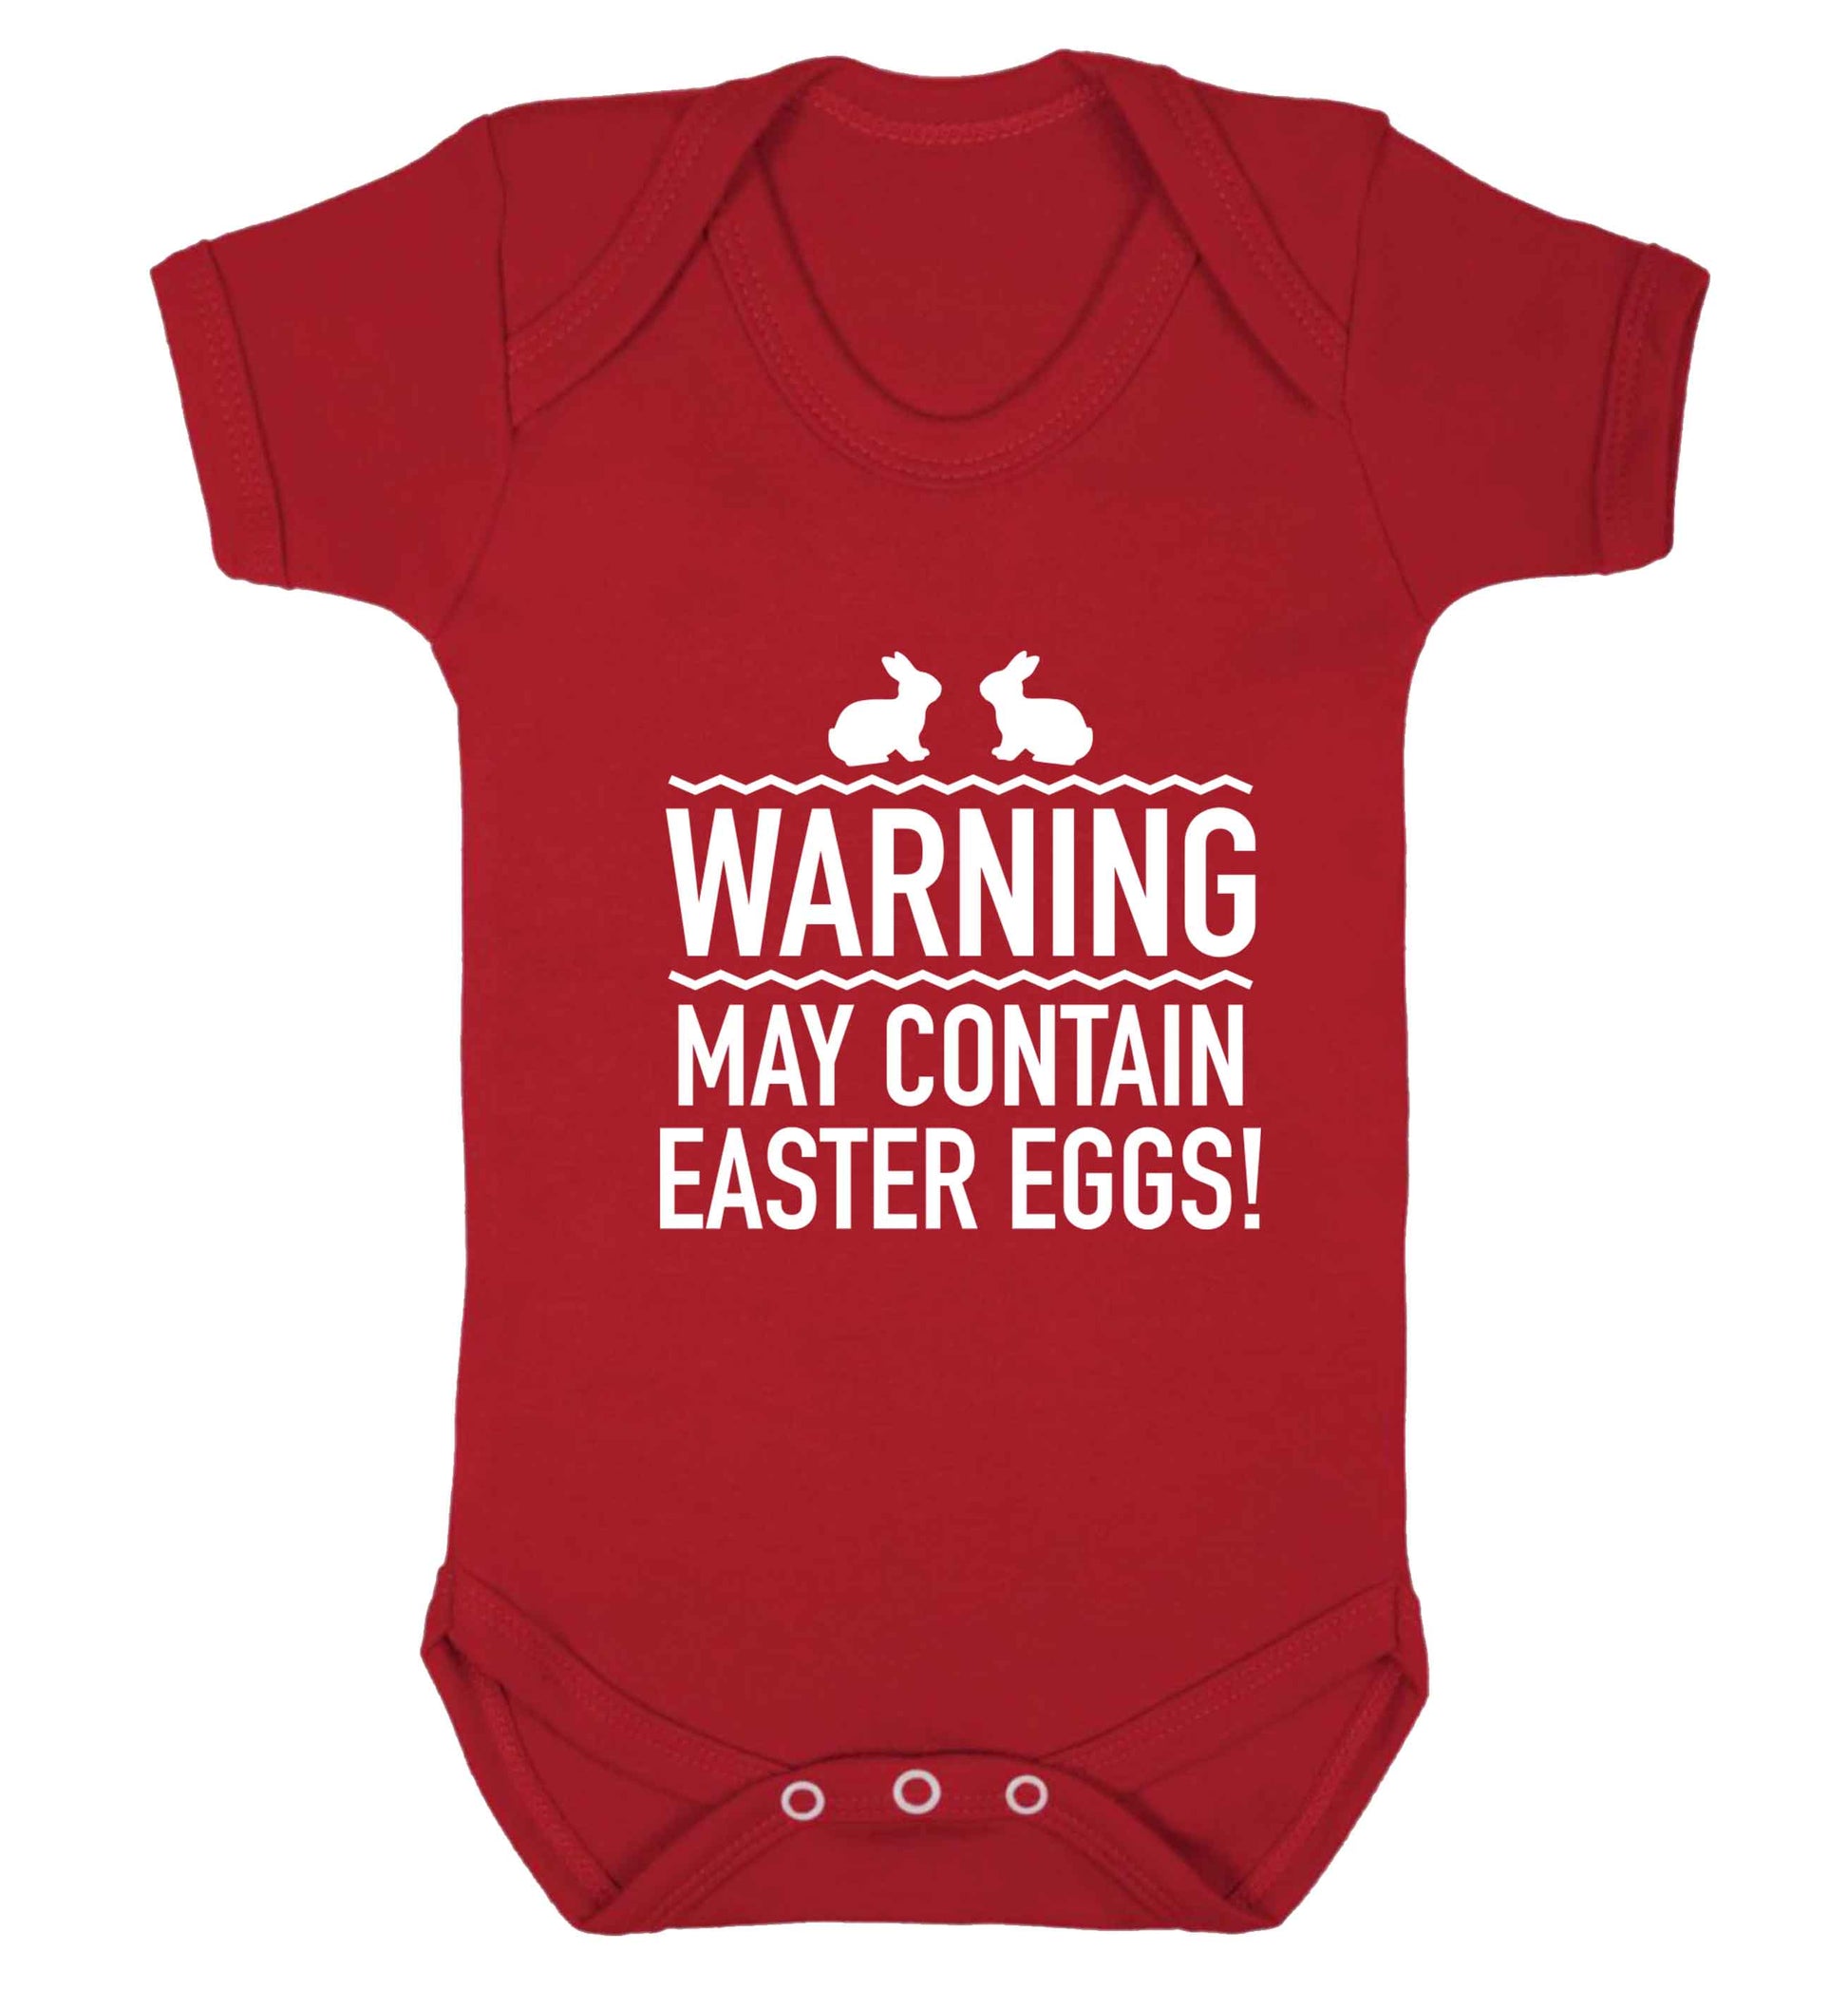 Warning may contain Easter eggs baby vest red 18-24 months